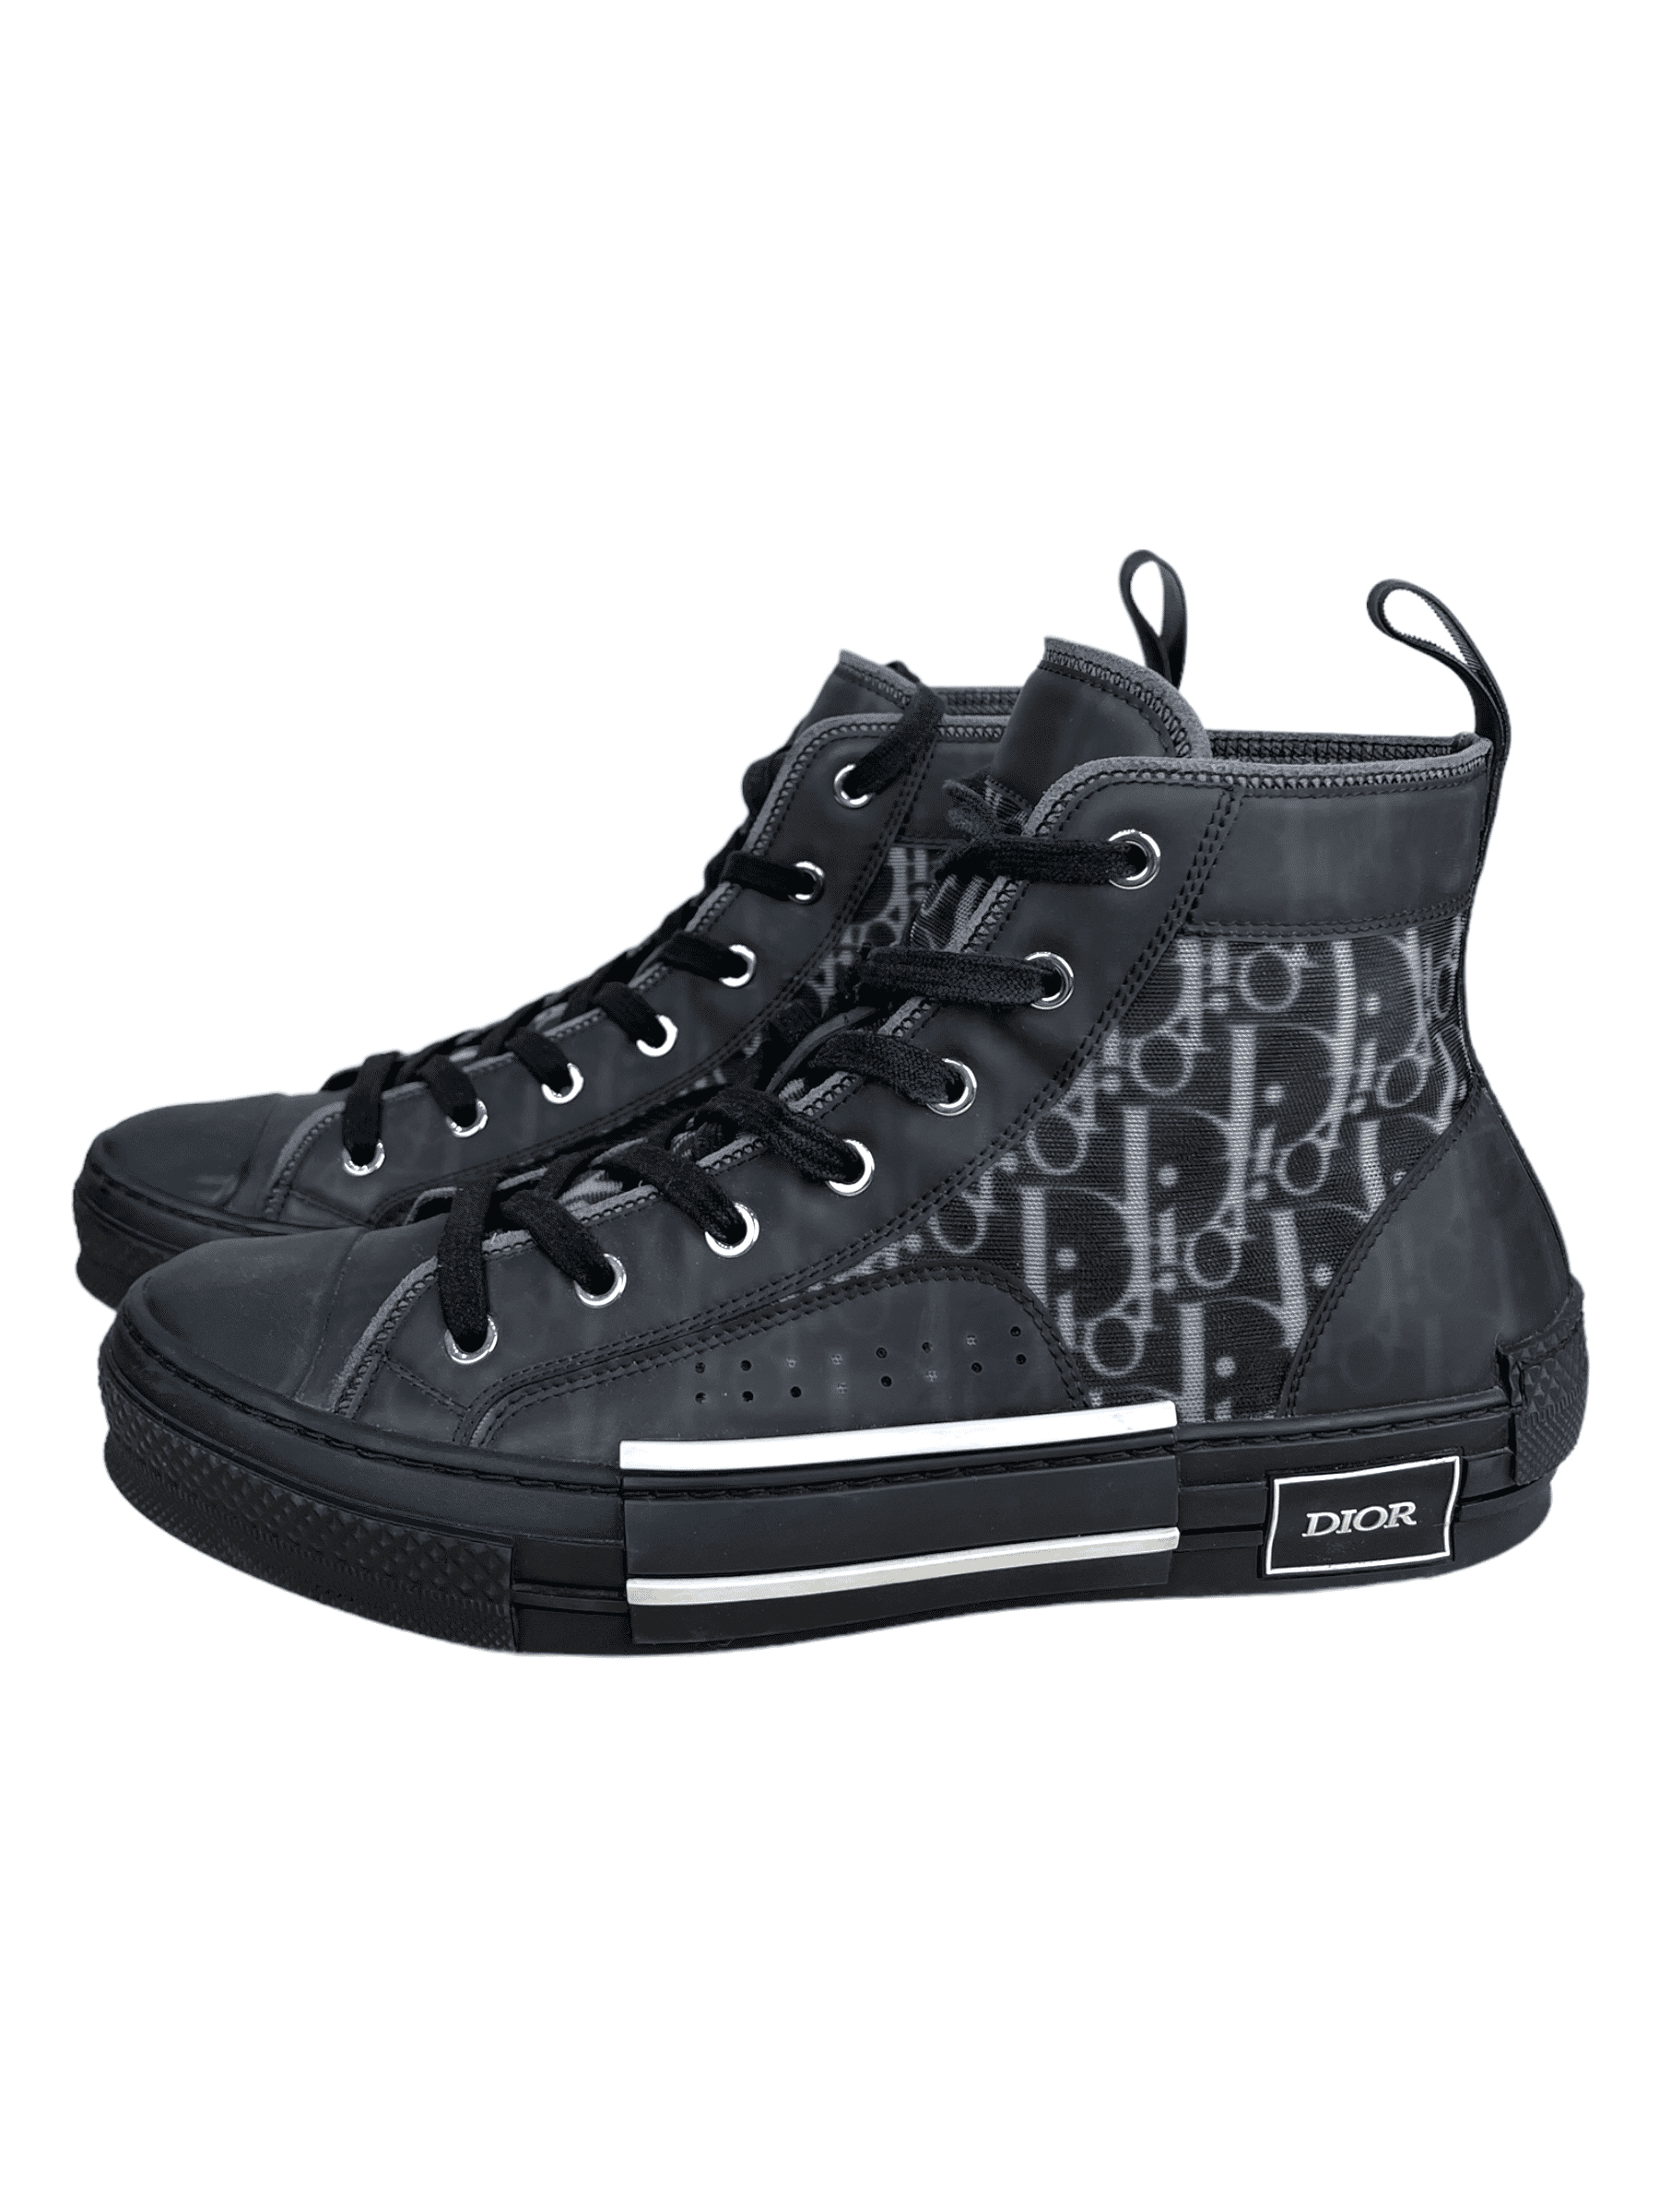 Christian Dior Black B23 High-top Sneaker- Genuine Design Luxury Consignment Calgary, Alberta, Canada New and Pre-Owned Clothing, Shoes, Accessories.